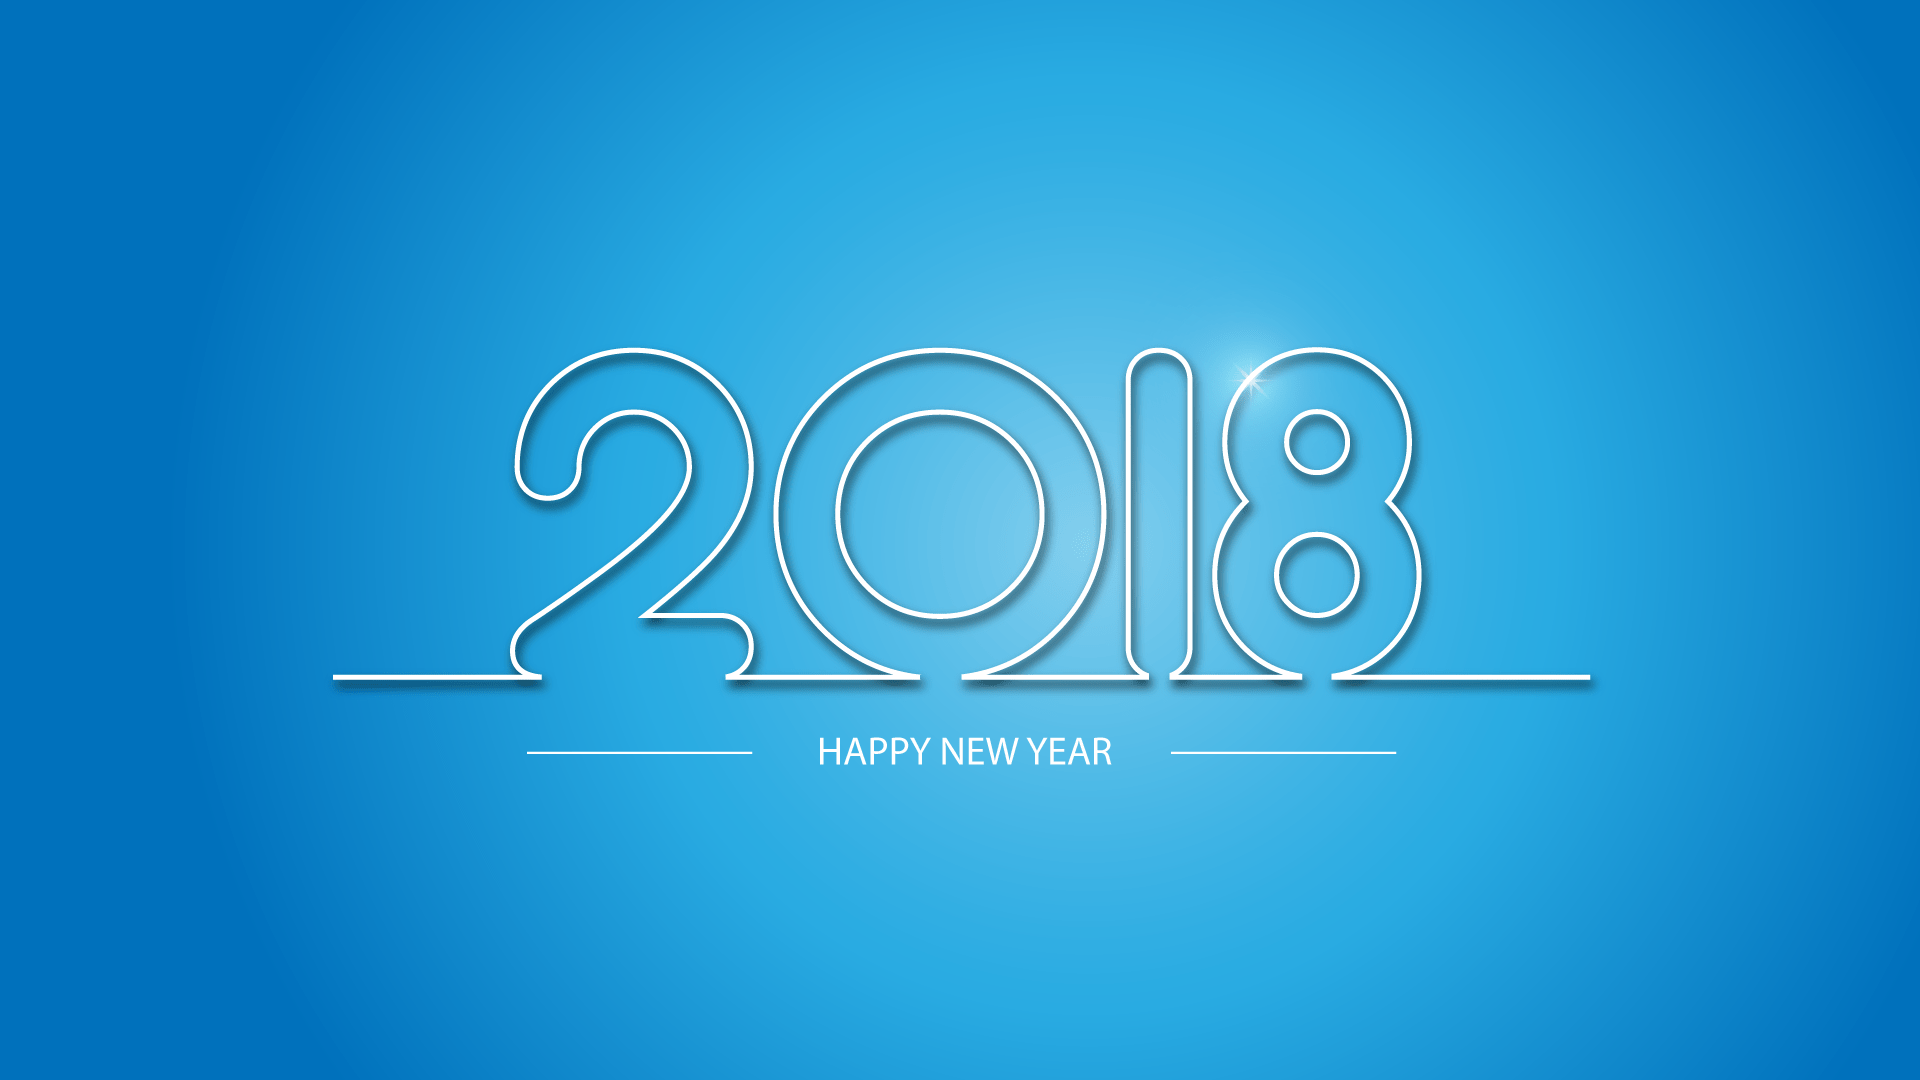 Make A Happy New Year Wallpaper